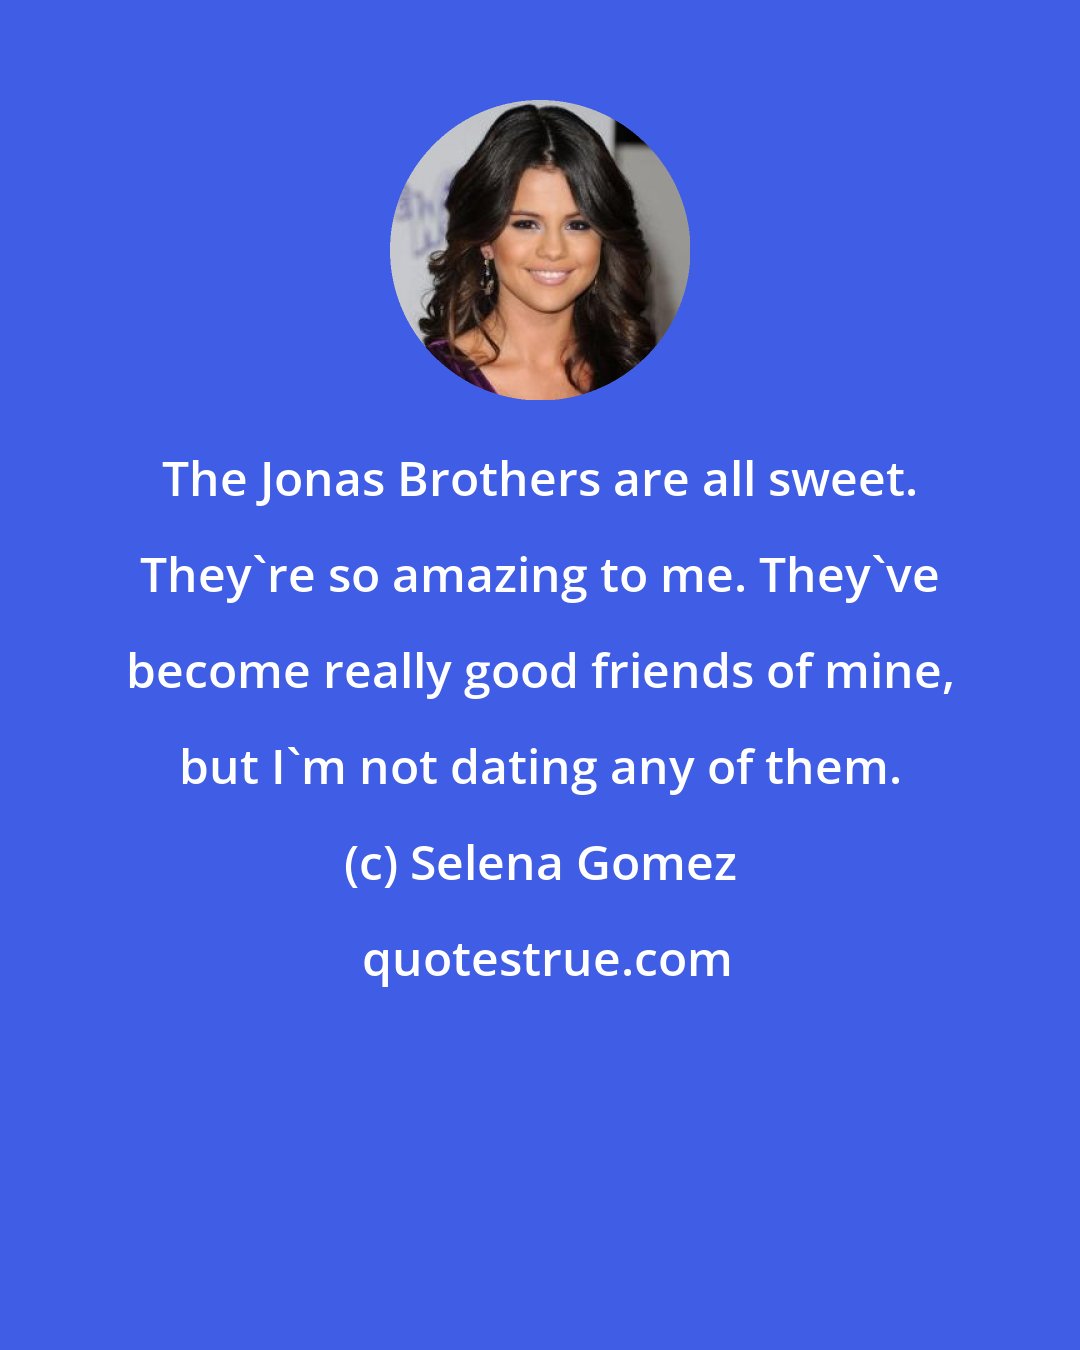 Selena Gomez: The Jonas Brothers are all sweet. They're so amazing to me. They've become really good friends of mine, but I'm not dating any of them.